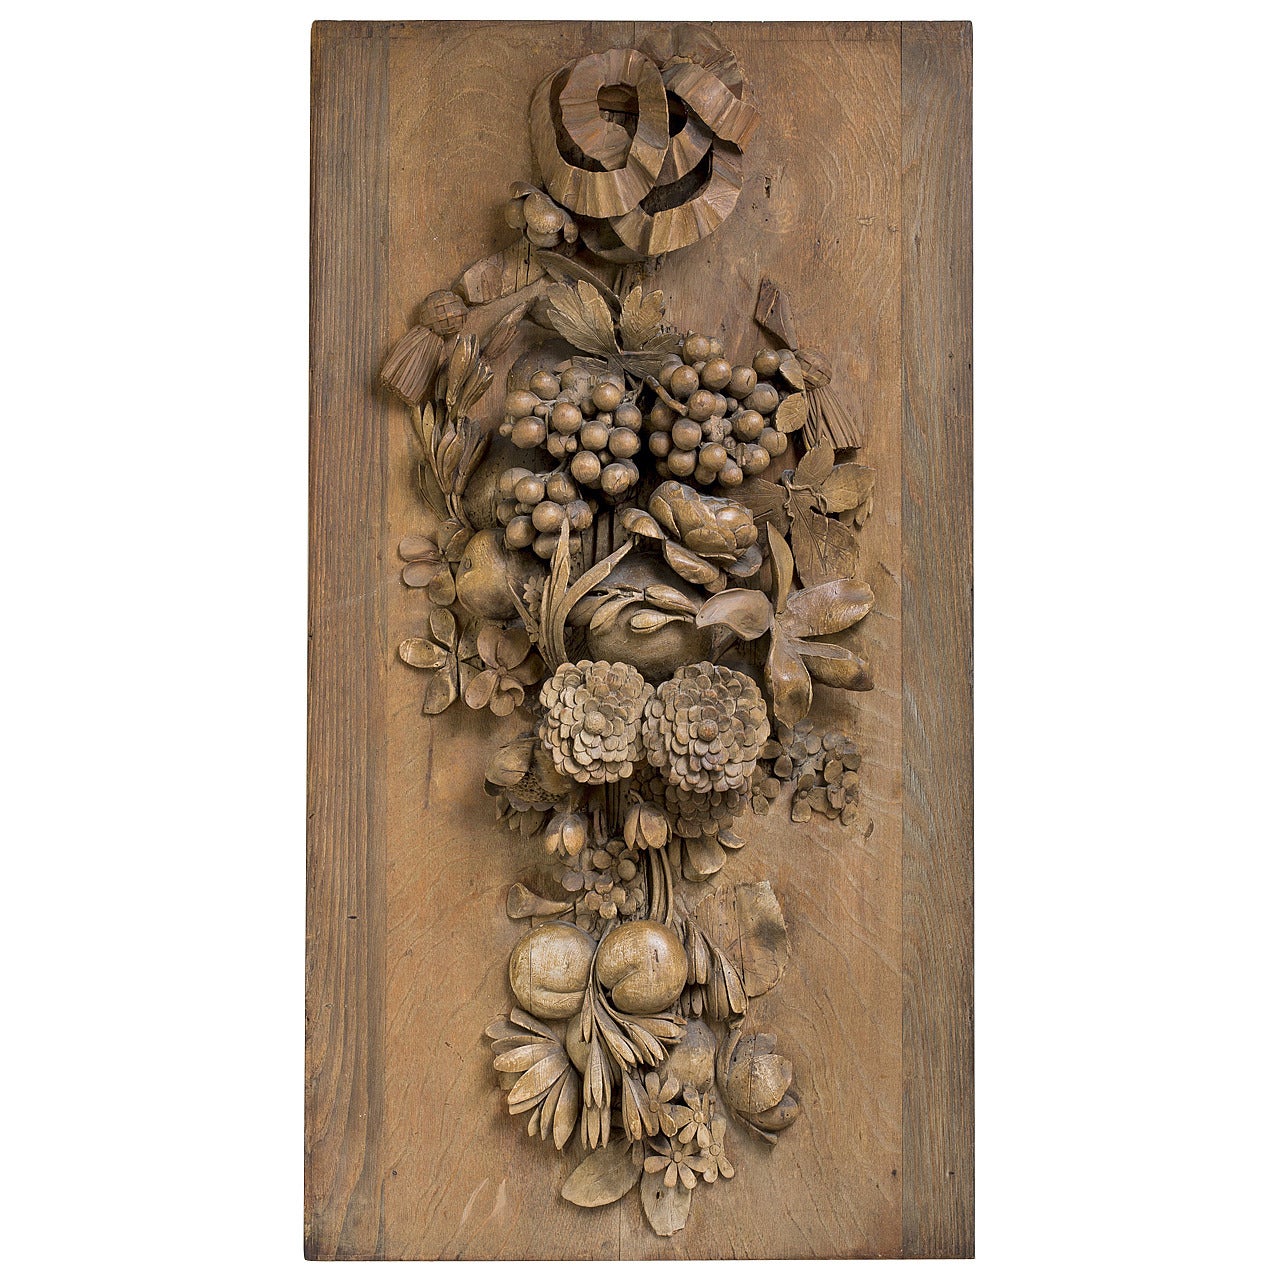 Limewood Still Life Panel in the Manner of Grinling Gibbons